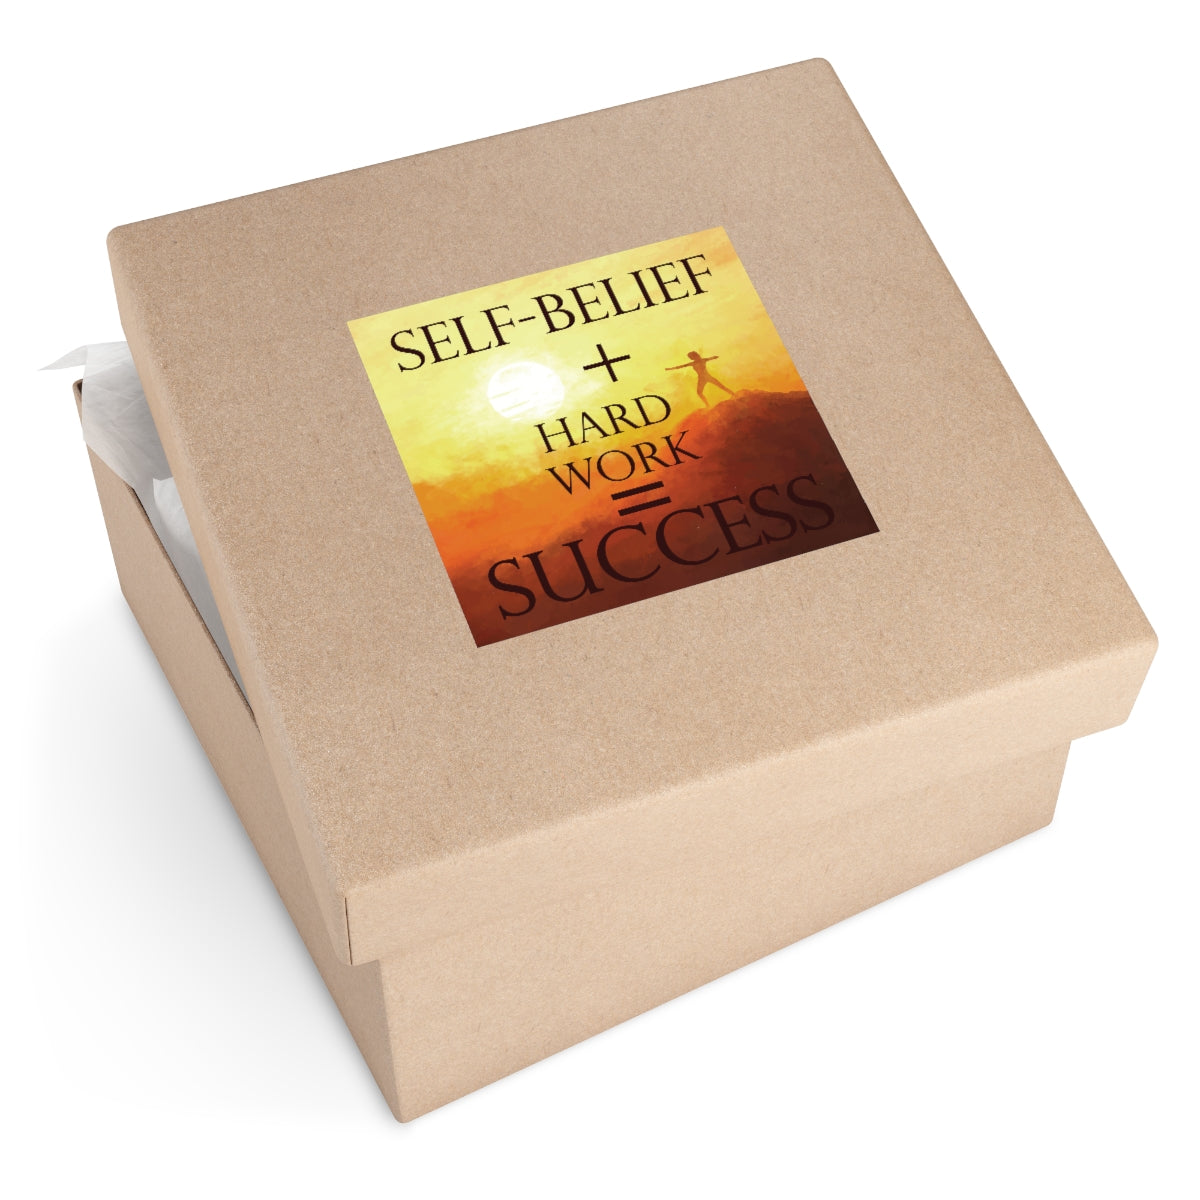 Self-belief and hard work sticker | Shop Success Stickers #size_8x8-inches